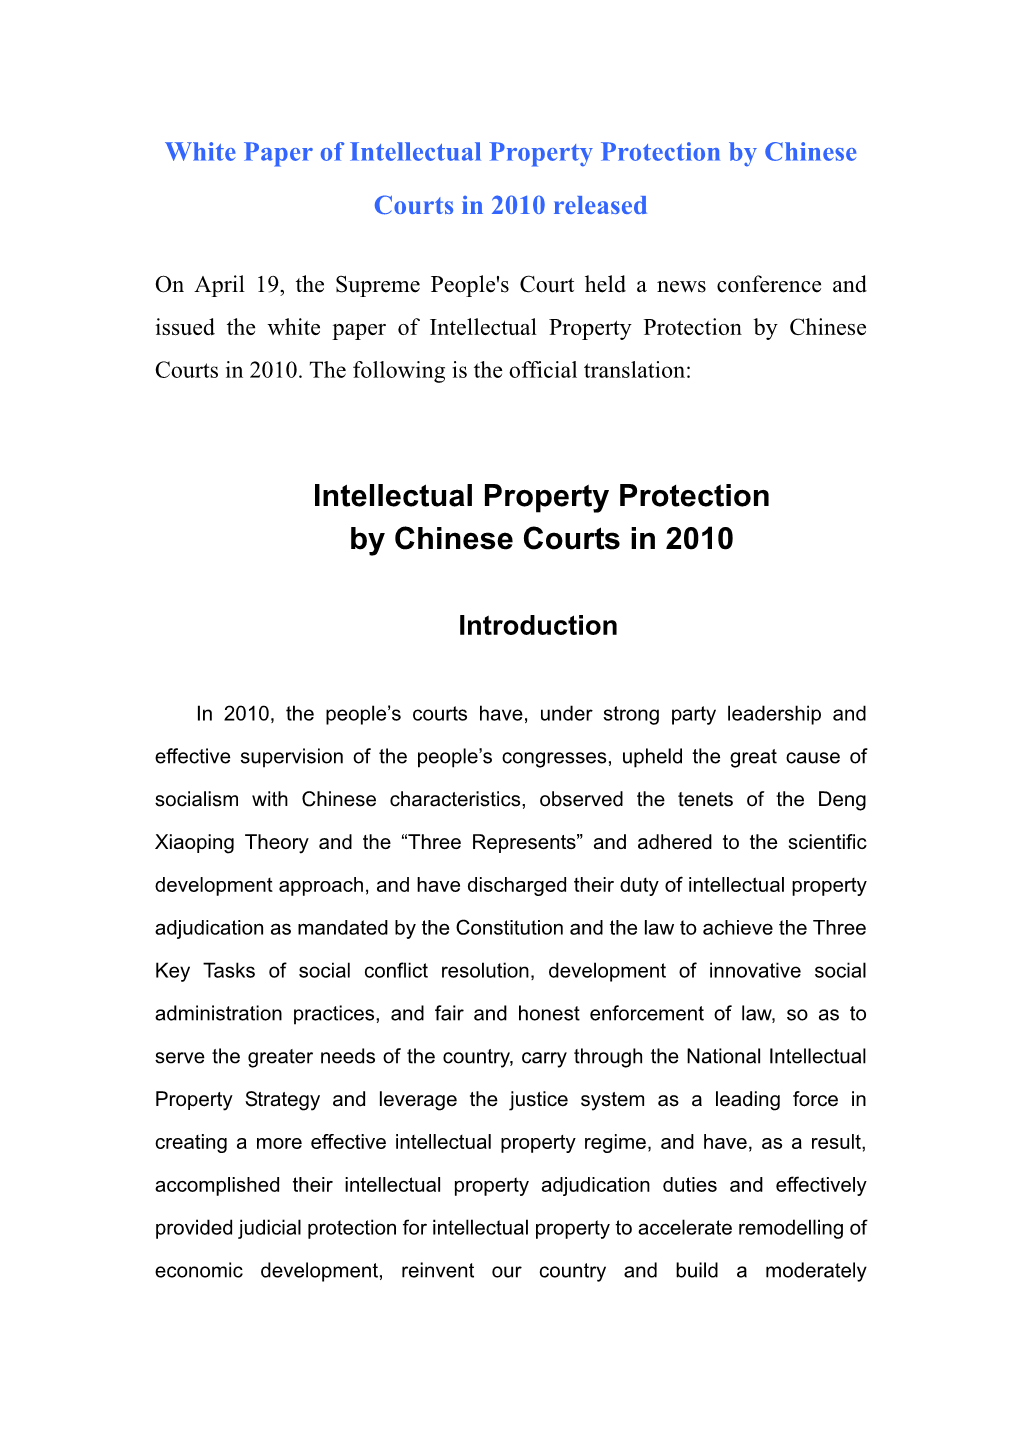 Intellectual Property Protection by Chinese Courts in 2010 Released